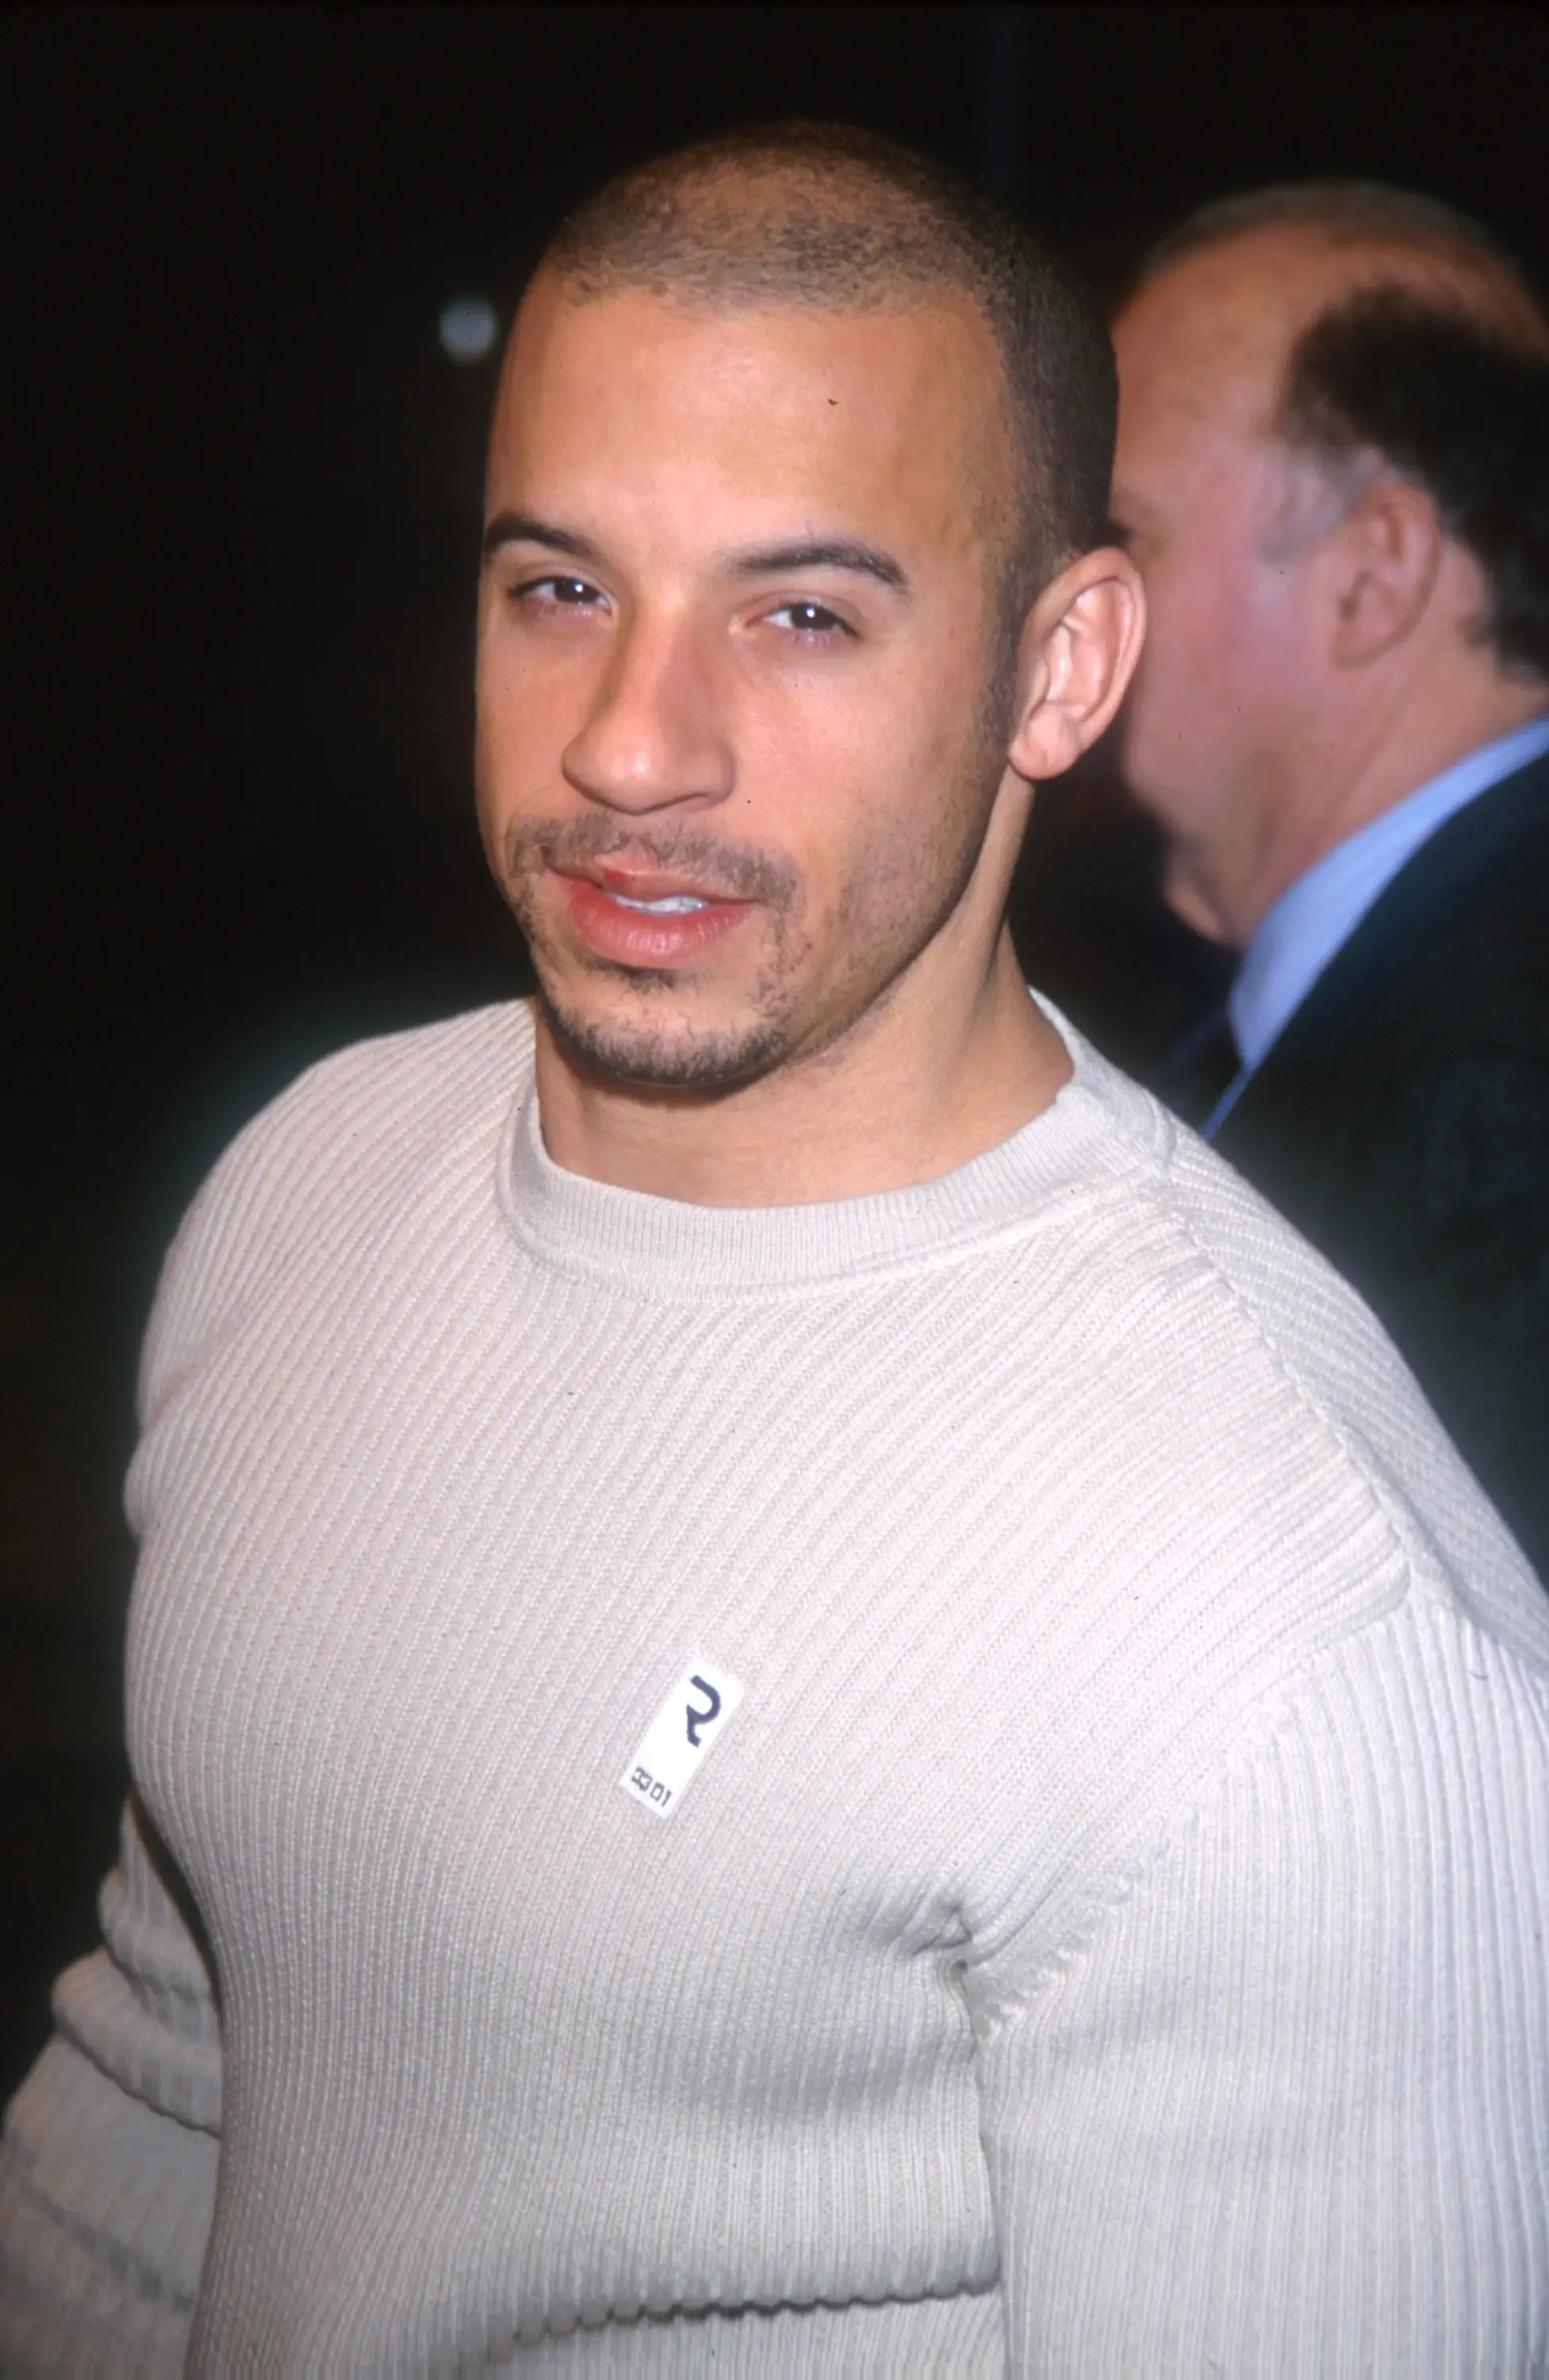 How tall is Vin Diesel - Real Age, Weight, Height in feet